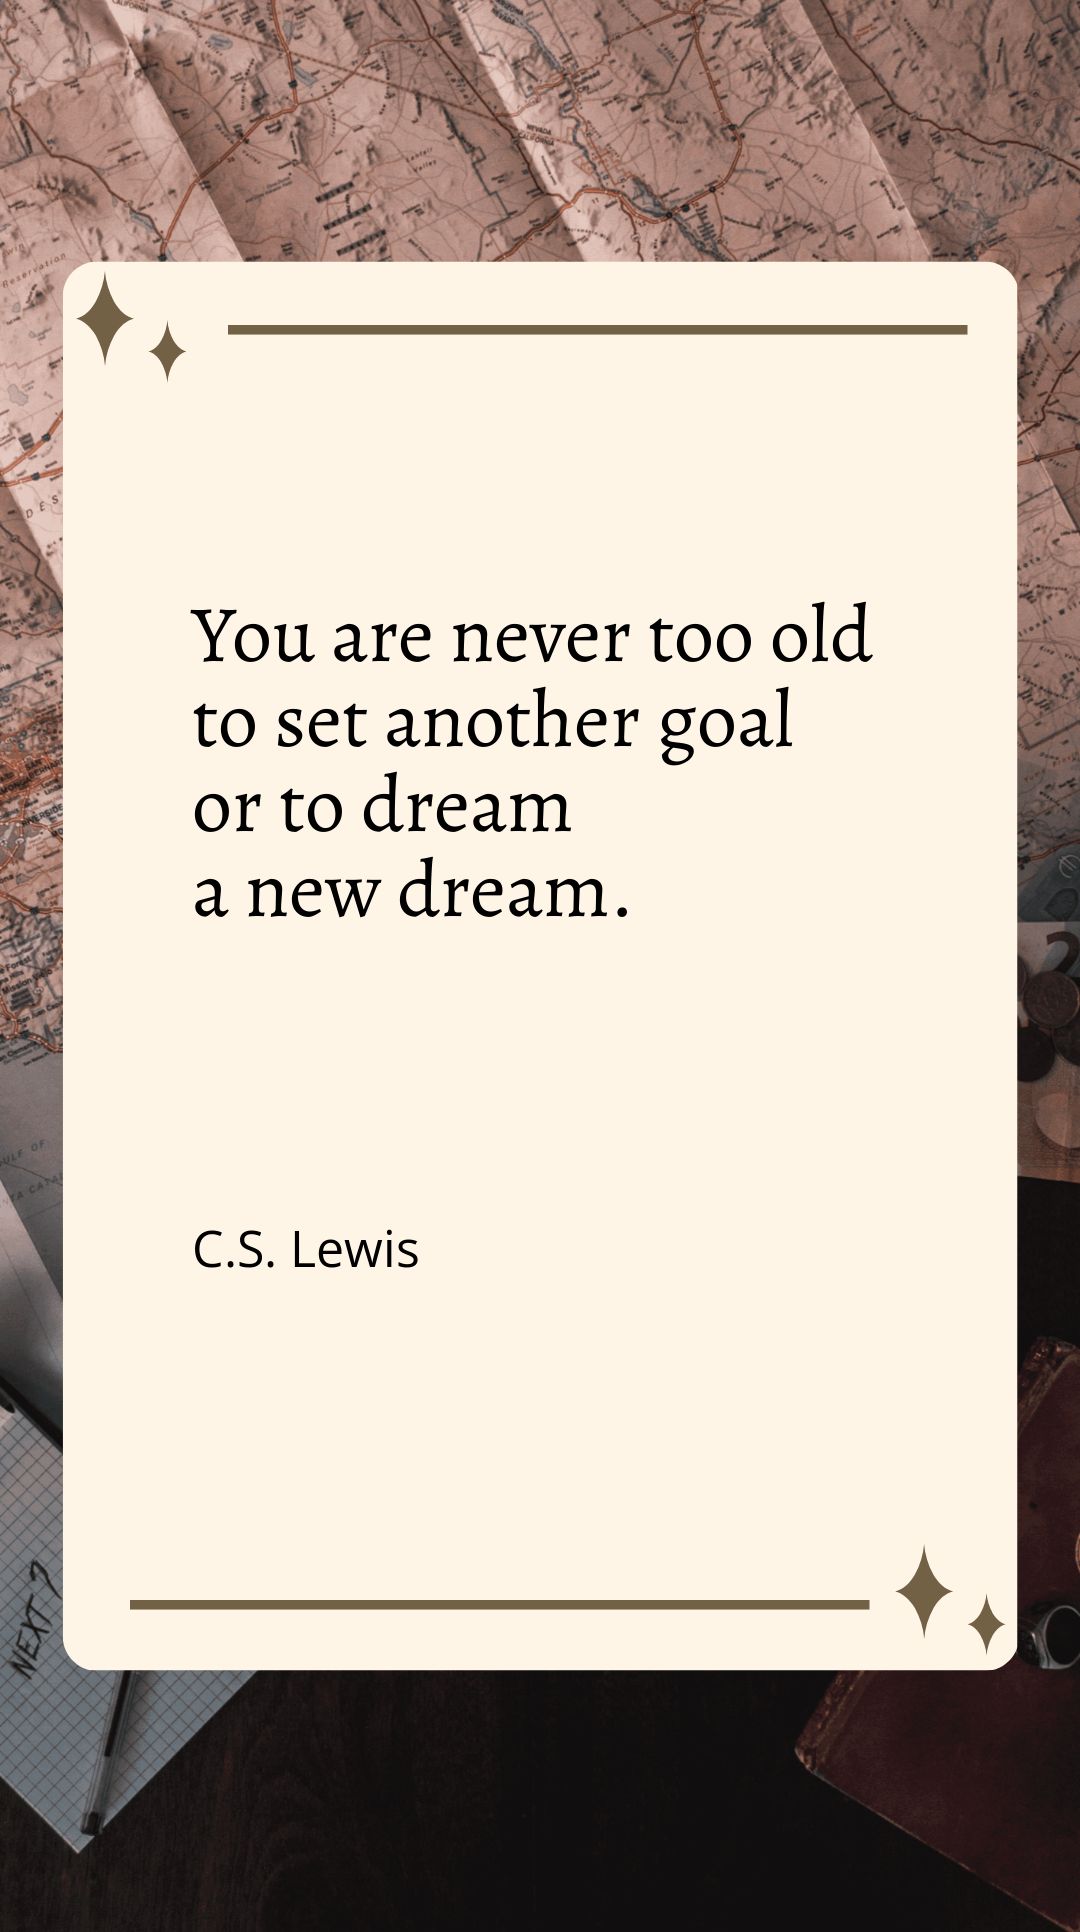 C.S. Lewis - You are never too old to set another goal or to dream a new dream